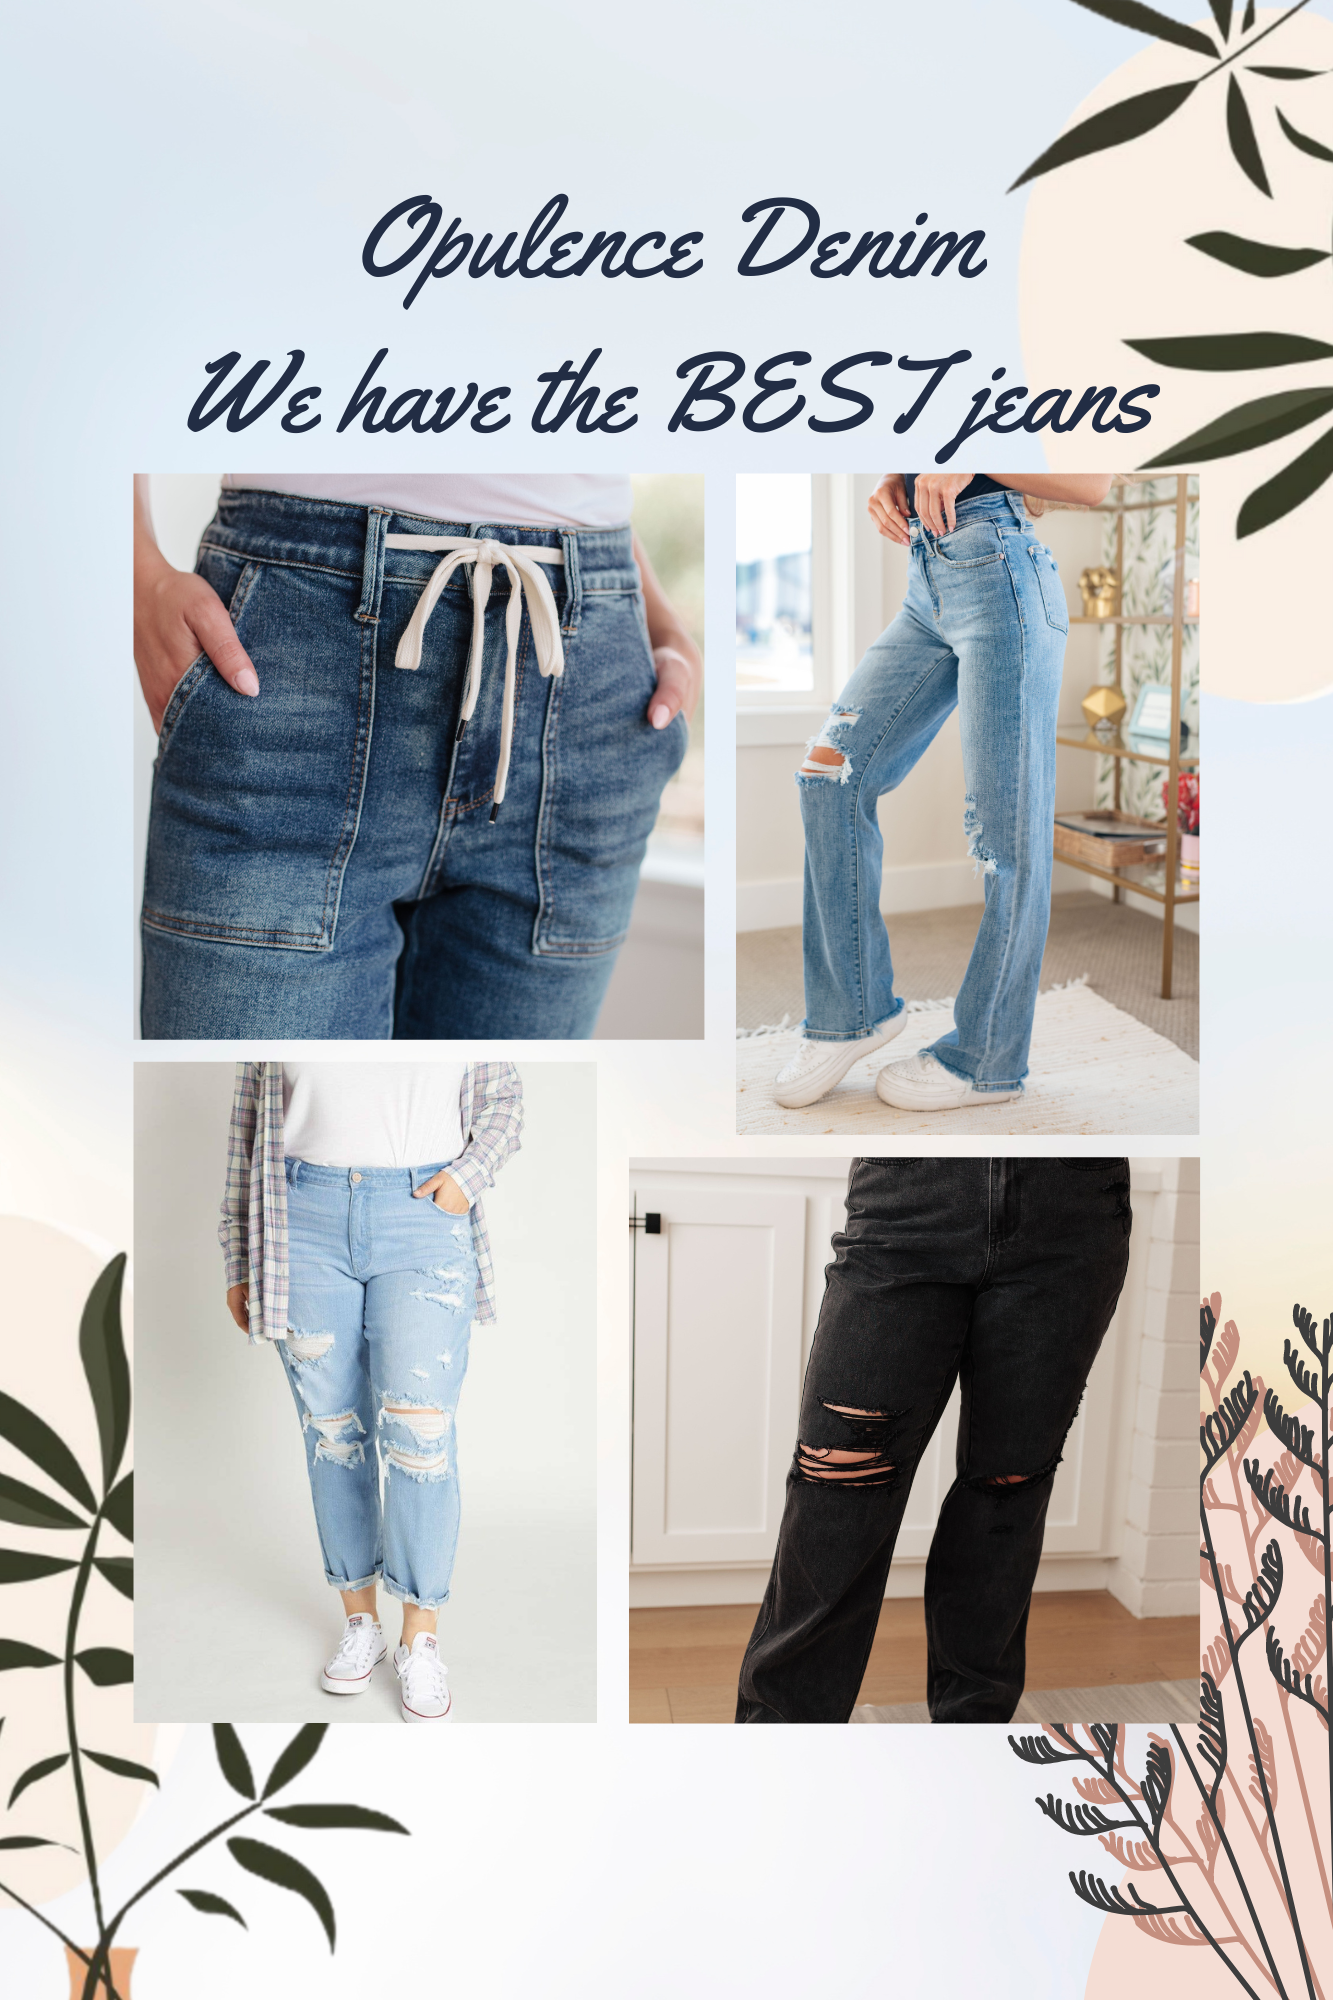 We have the BEST Jeans!